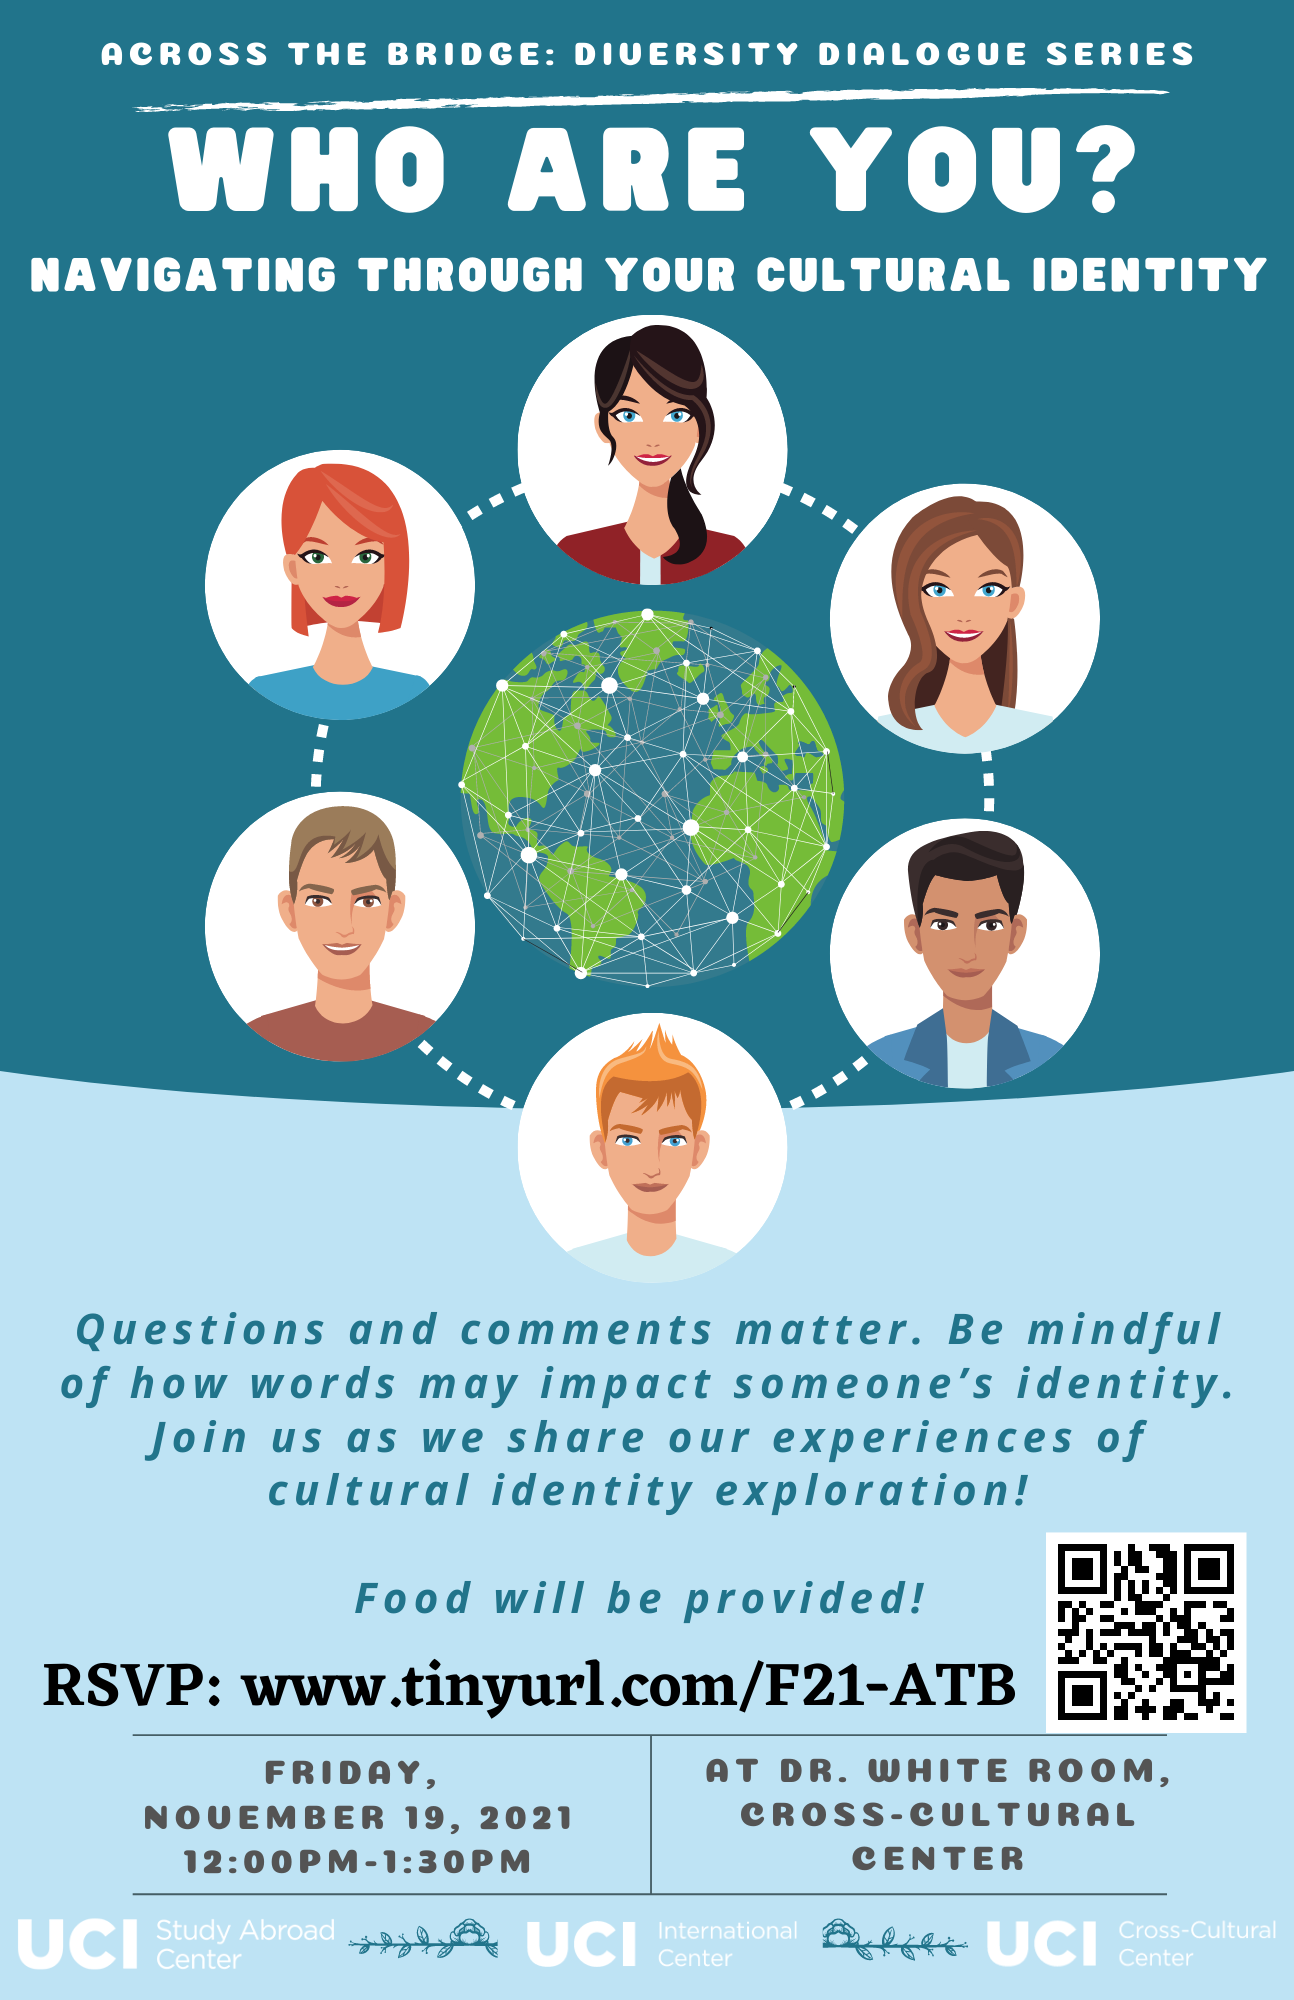 Across the Bridge: Diversity Dialogue Series. Who are you? Navigating through your cultural identity. Questions and comments matter. Be mindful of how words may impact someone's identity. Join us as we share our experiences of cultural identity exploration! Food will be provided! RSVP: www.tinyurl.com/F21-ATB. Friday, November 19th, 2021. 12:00pm to 1:30pm. At Dr. White Room, Cross-Cultural Center